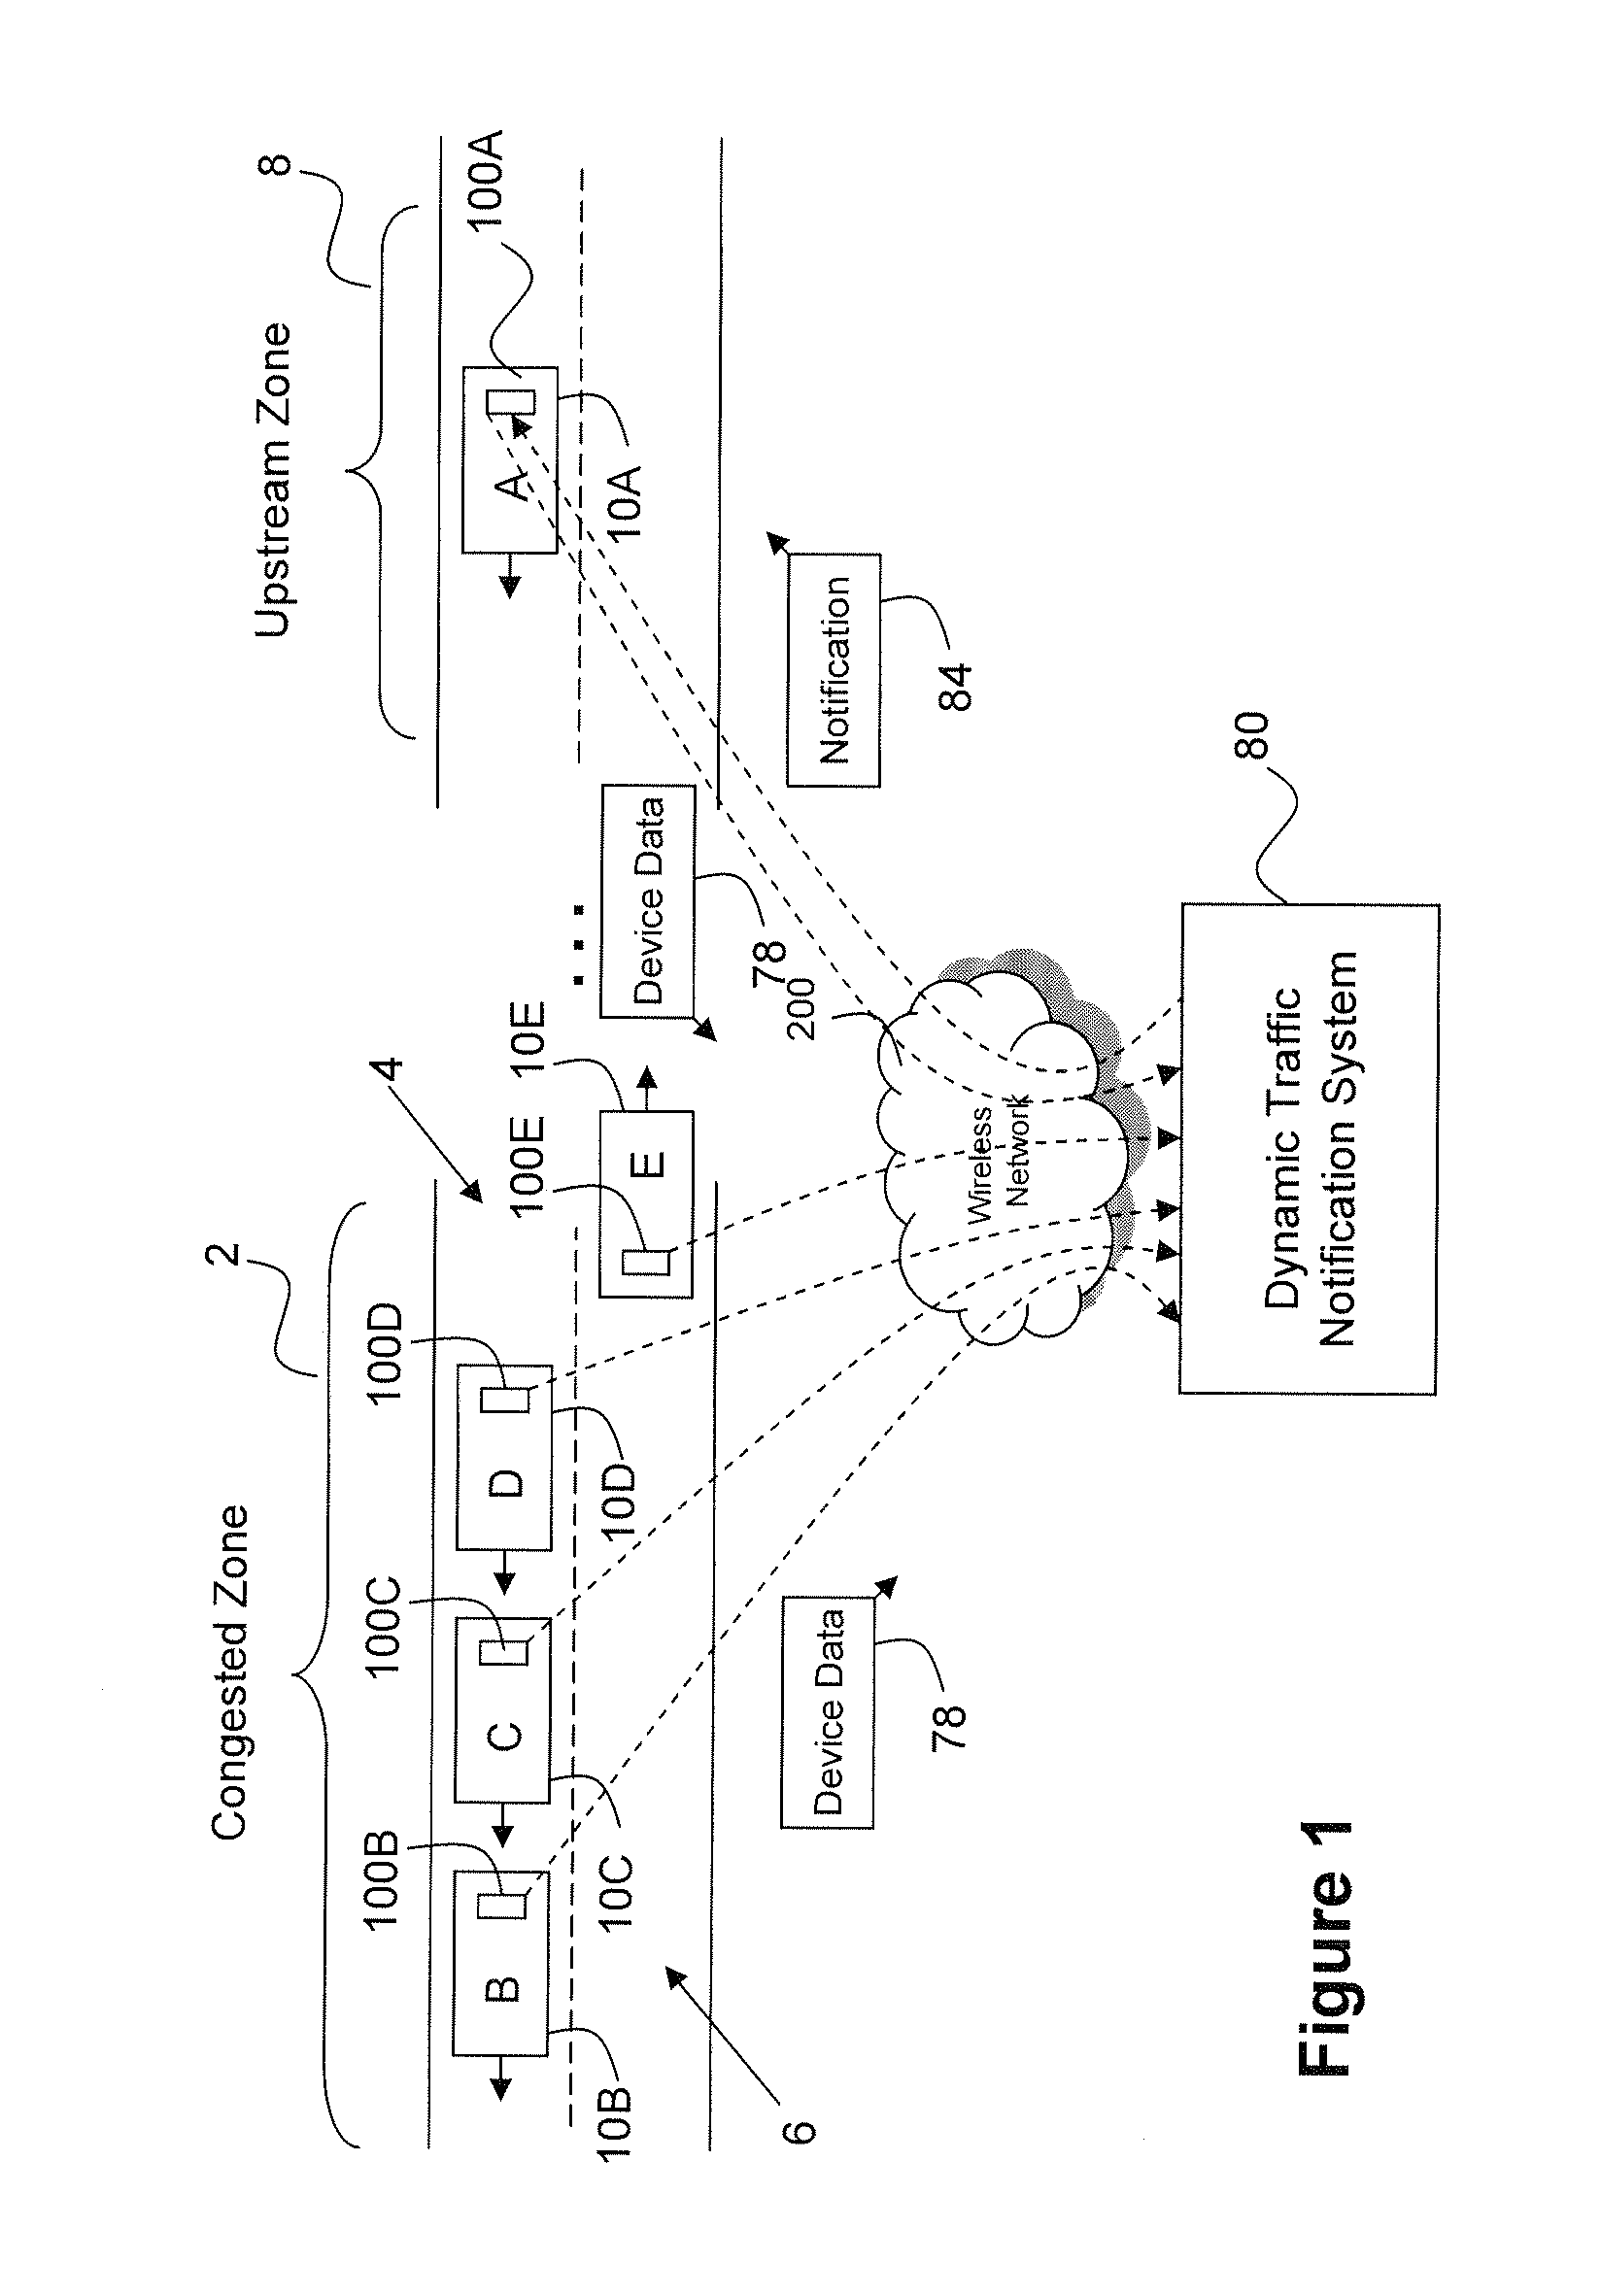 System and method of automatic destination selection